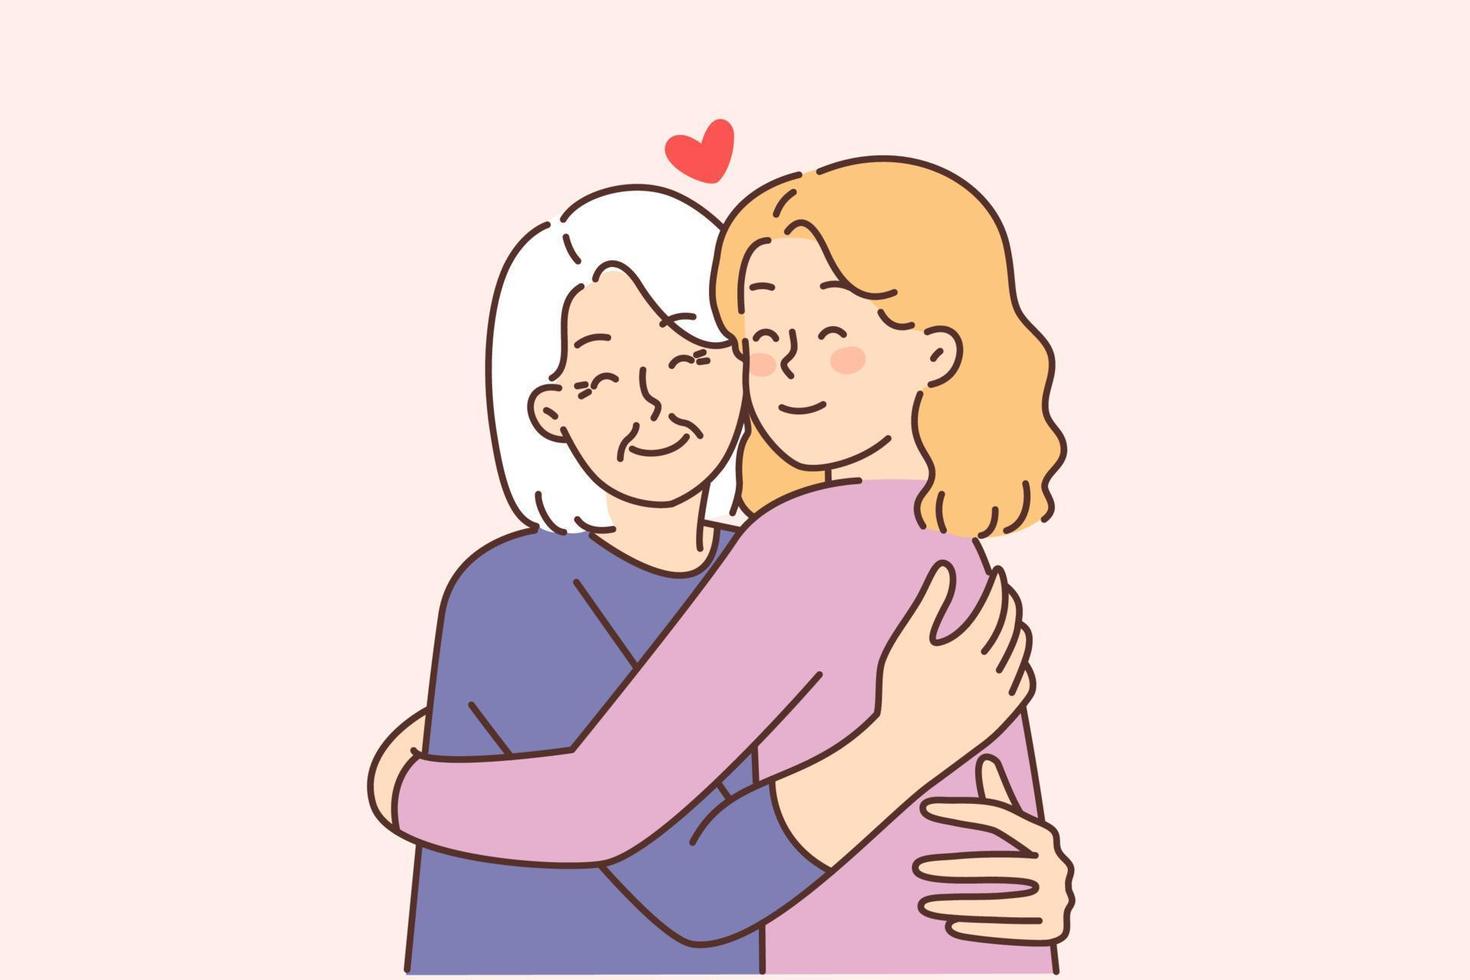 Smiling elderly grandmother hug loving woman. Happy caring grownup daughter embrace old mother. Family reunion. Vector illustration.